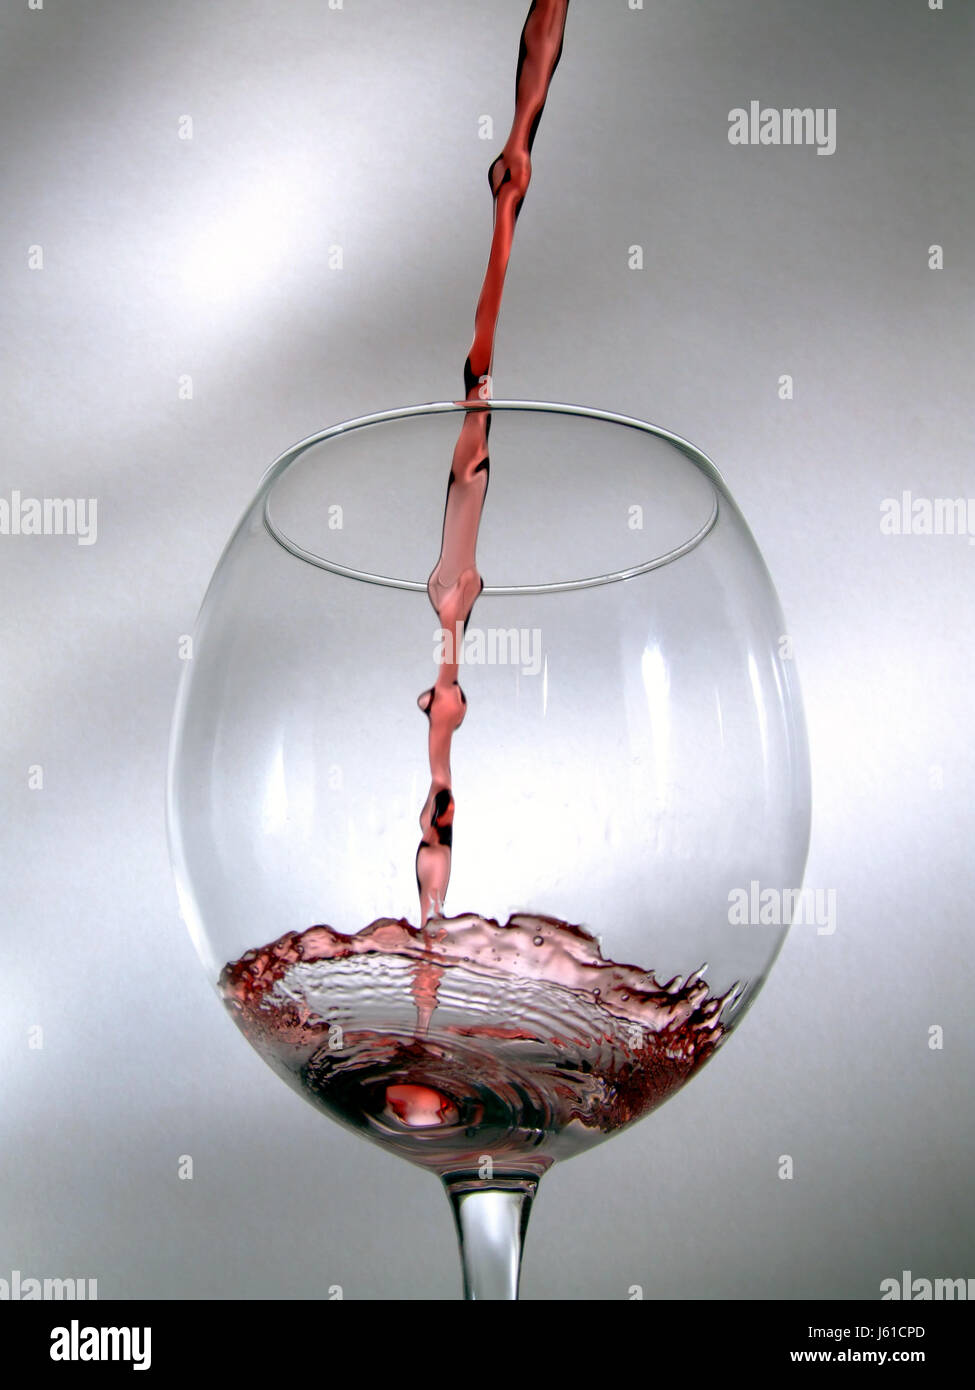 glass chalice tumbler wine alcohol red wine drugs red drop drip drops seeping Stock Photo